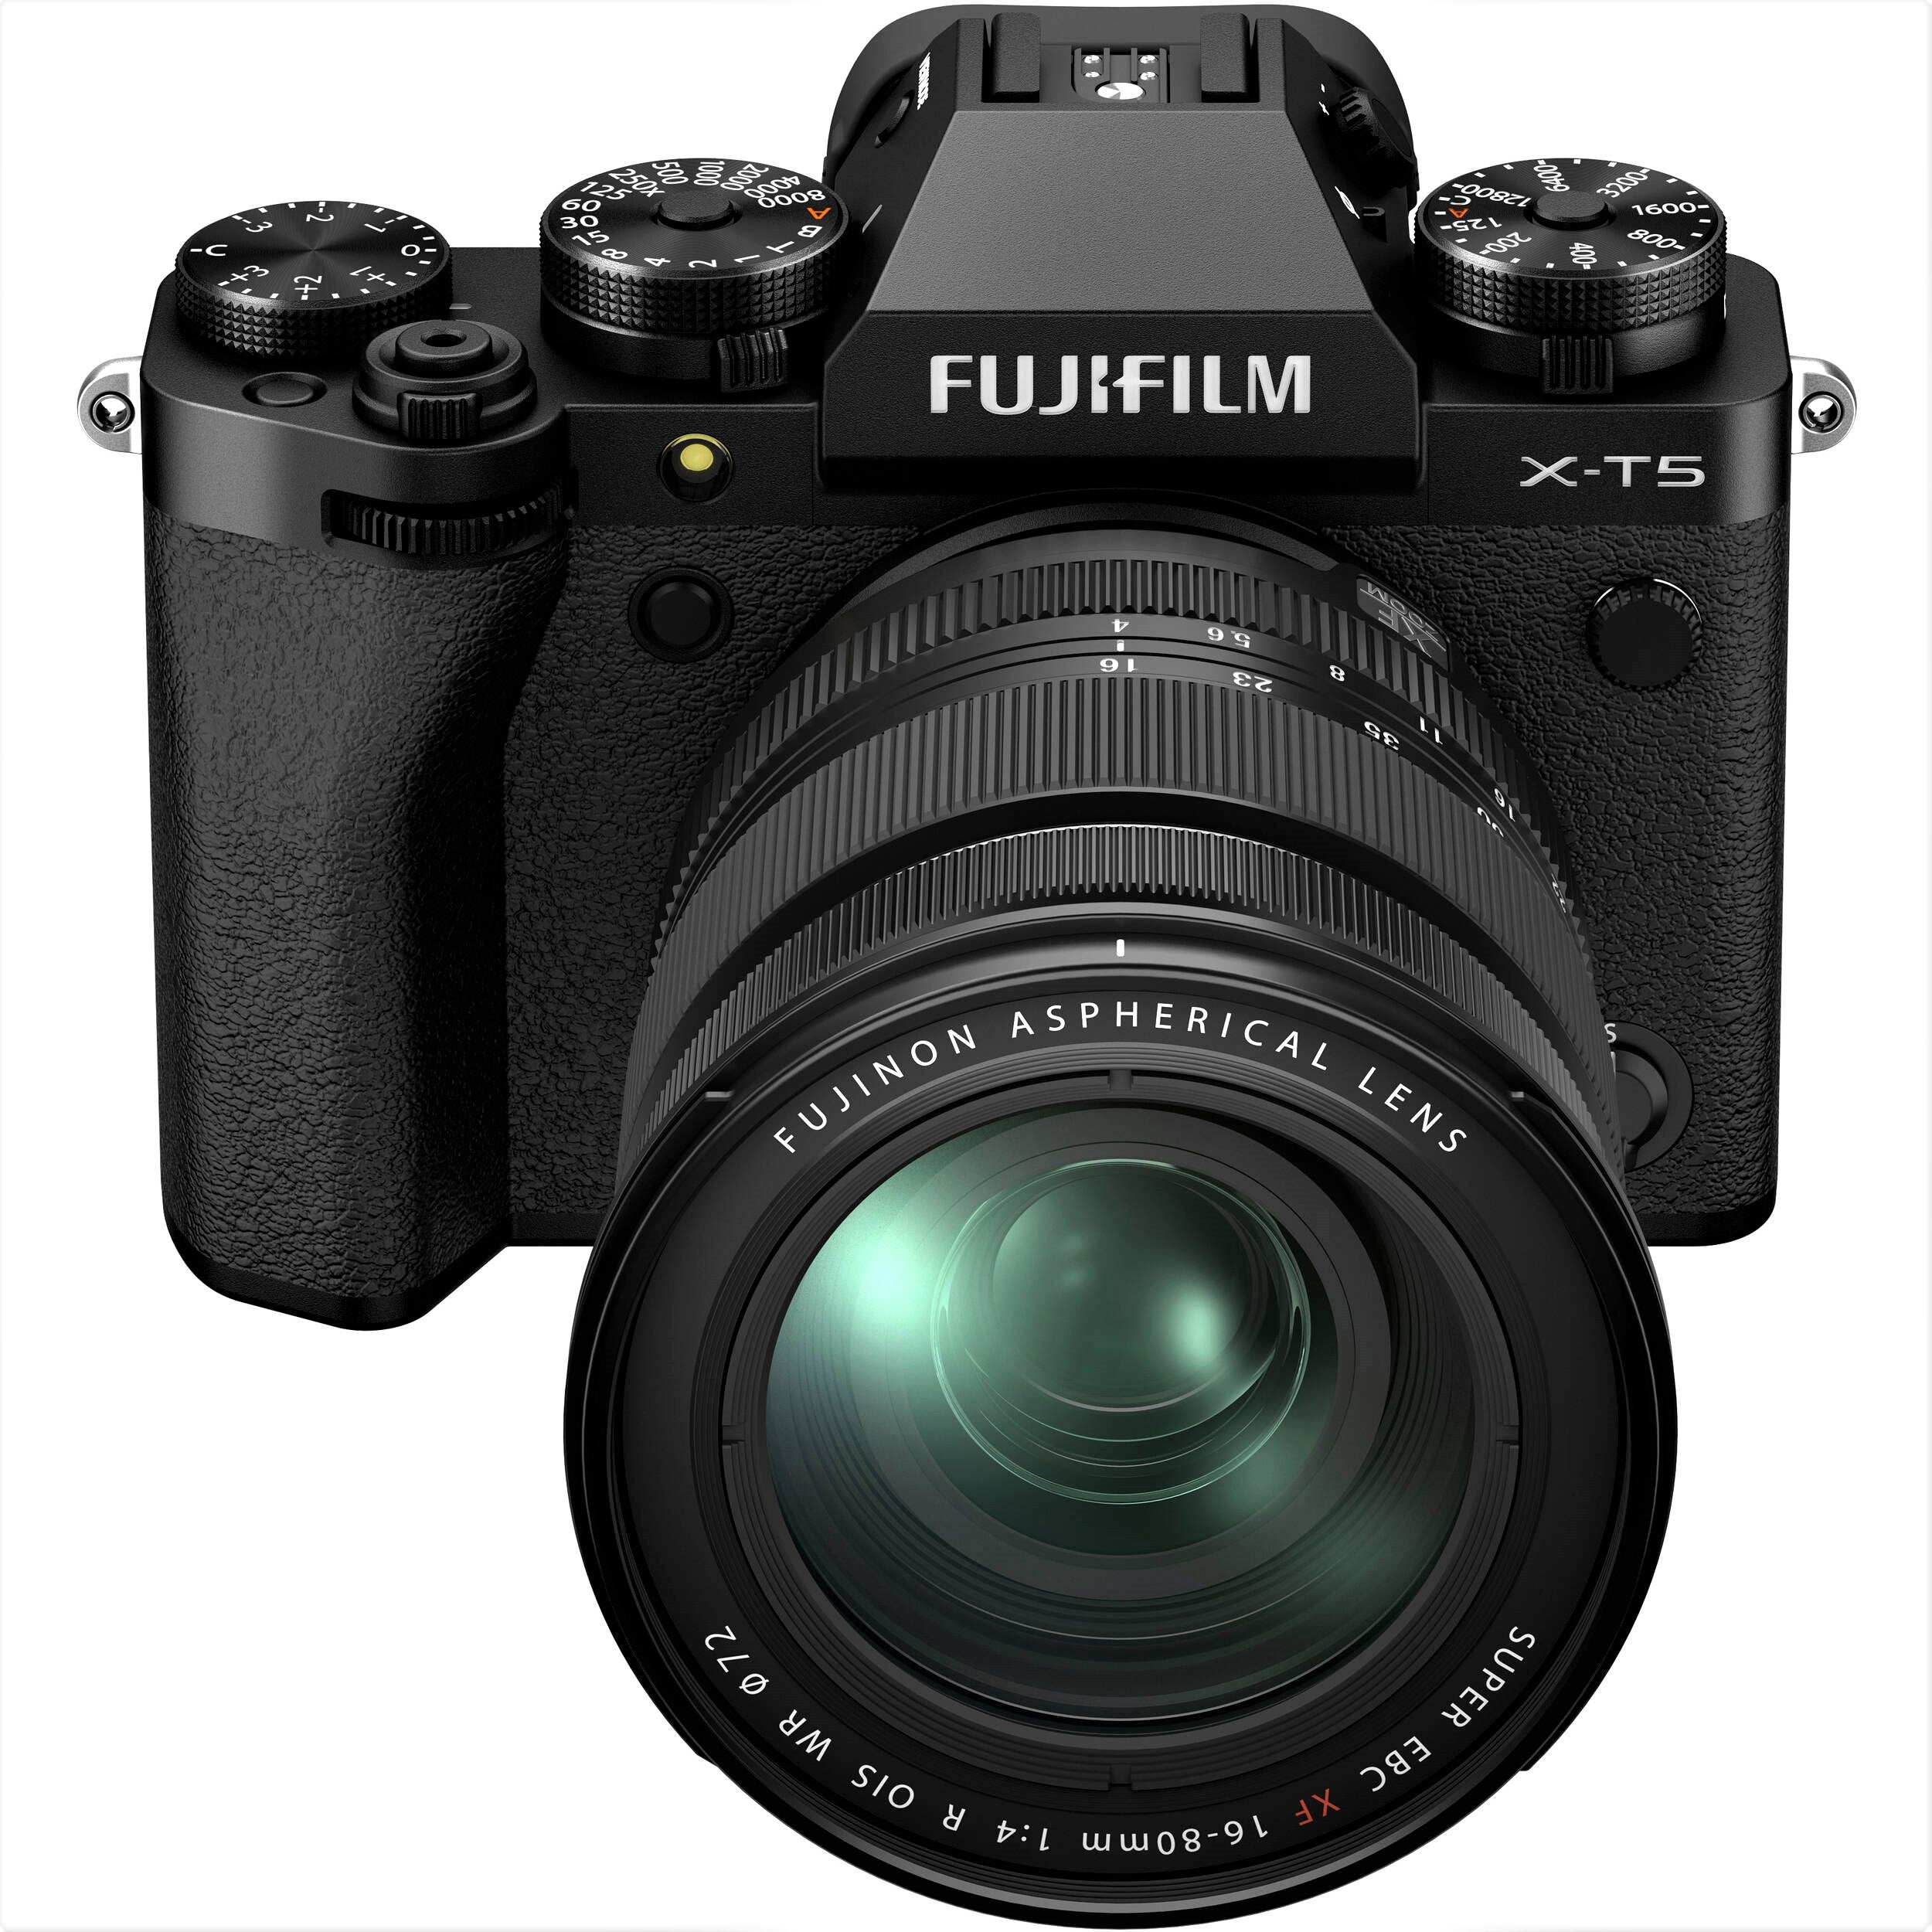 Fujifilm X-T5 review: A mirrorless camera built for photographers